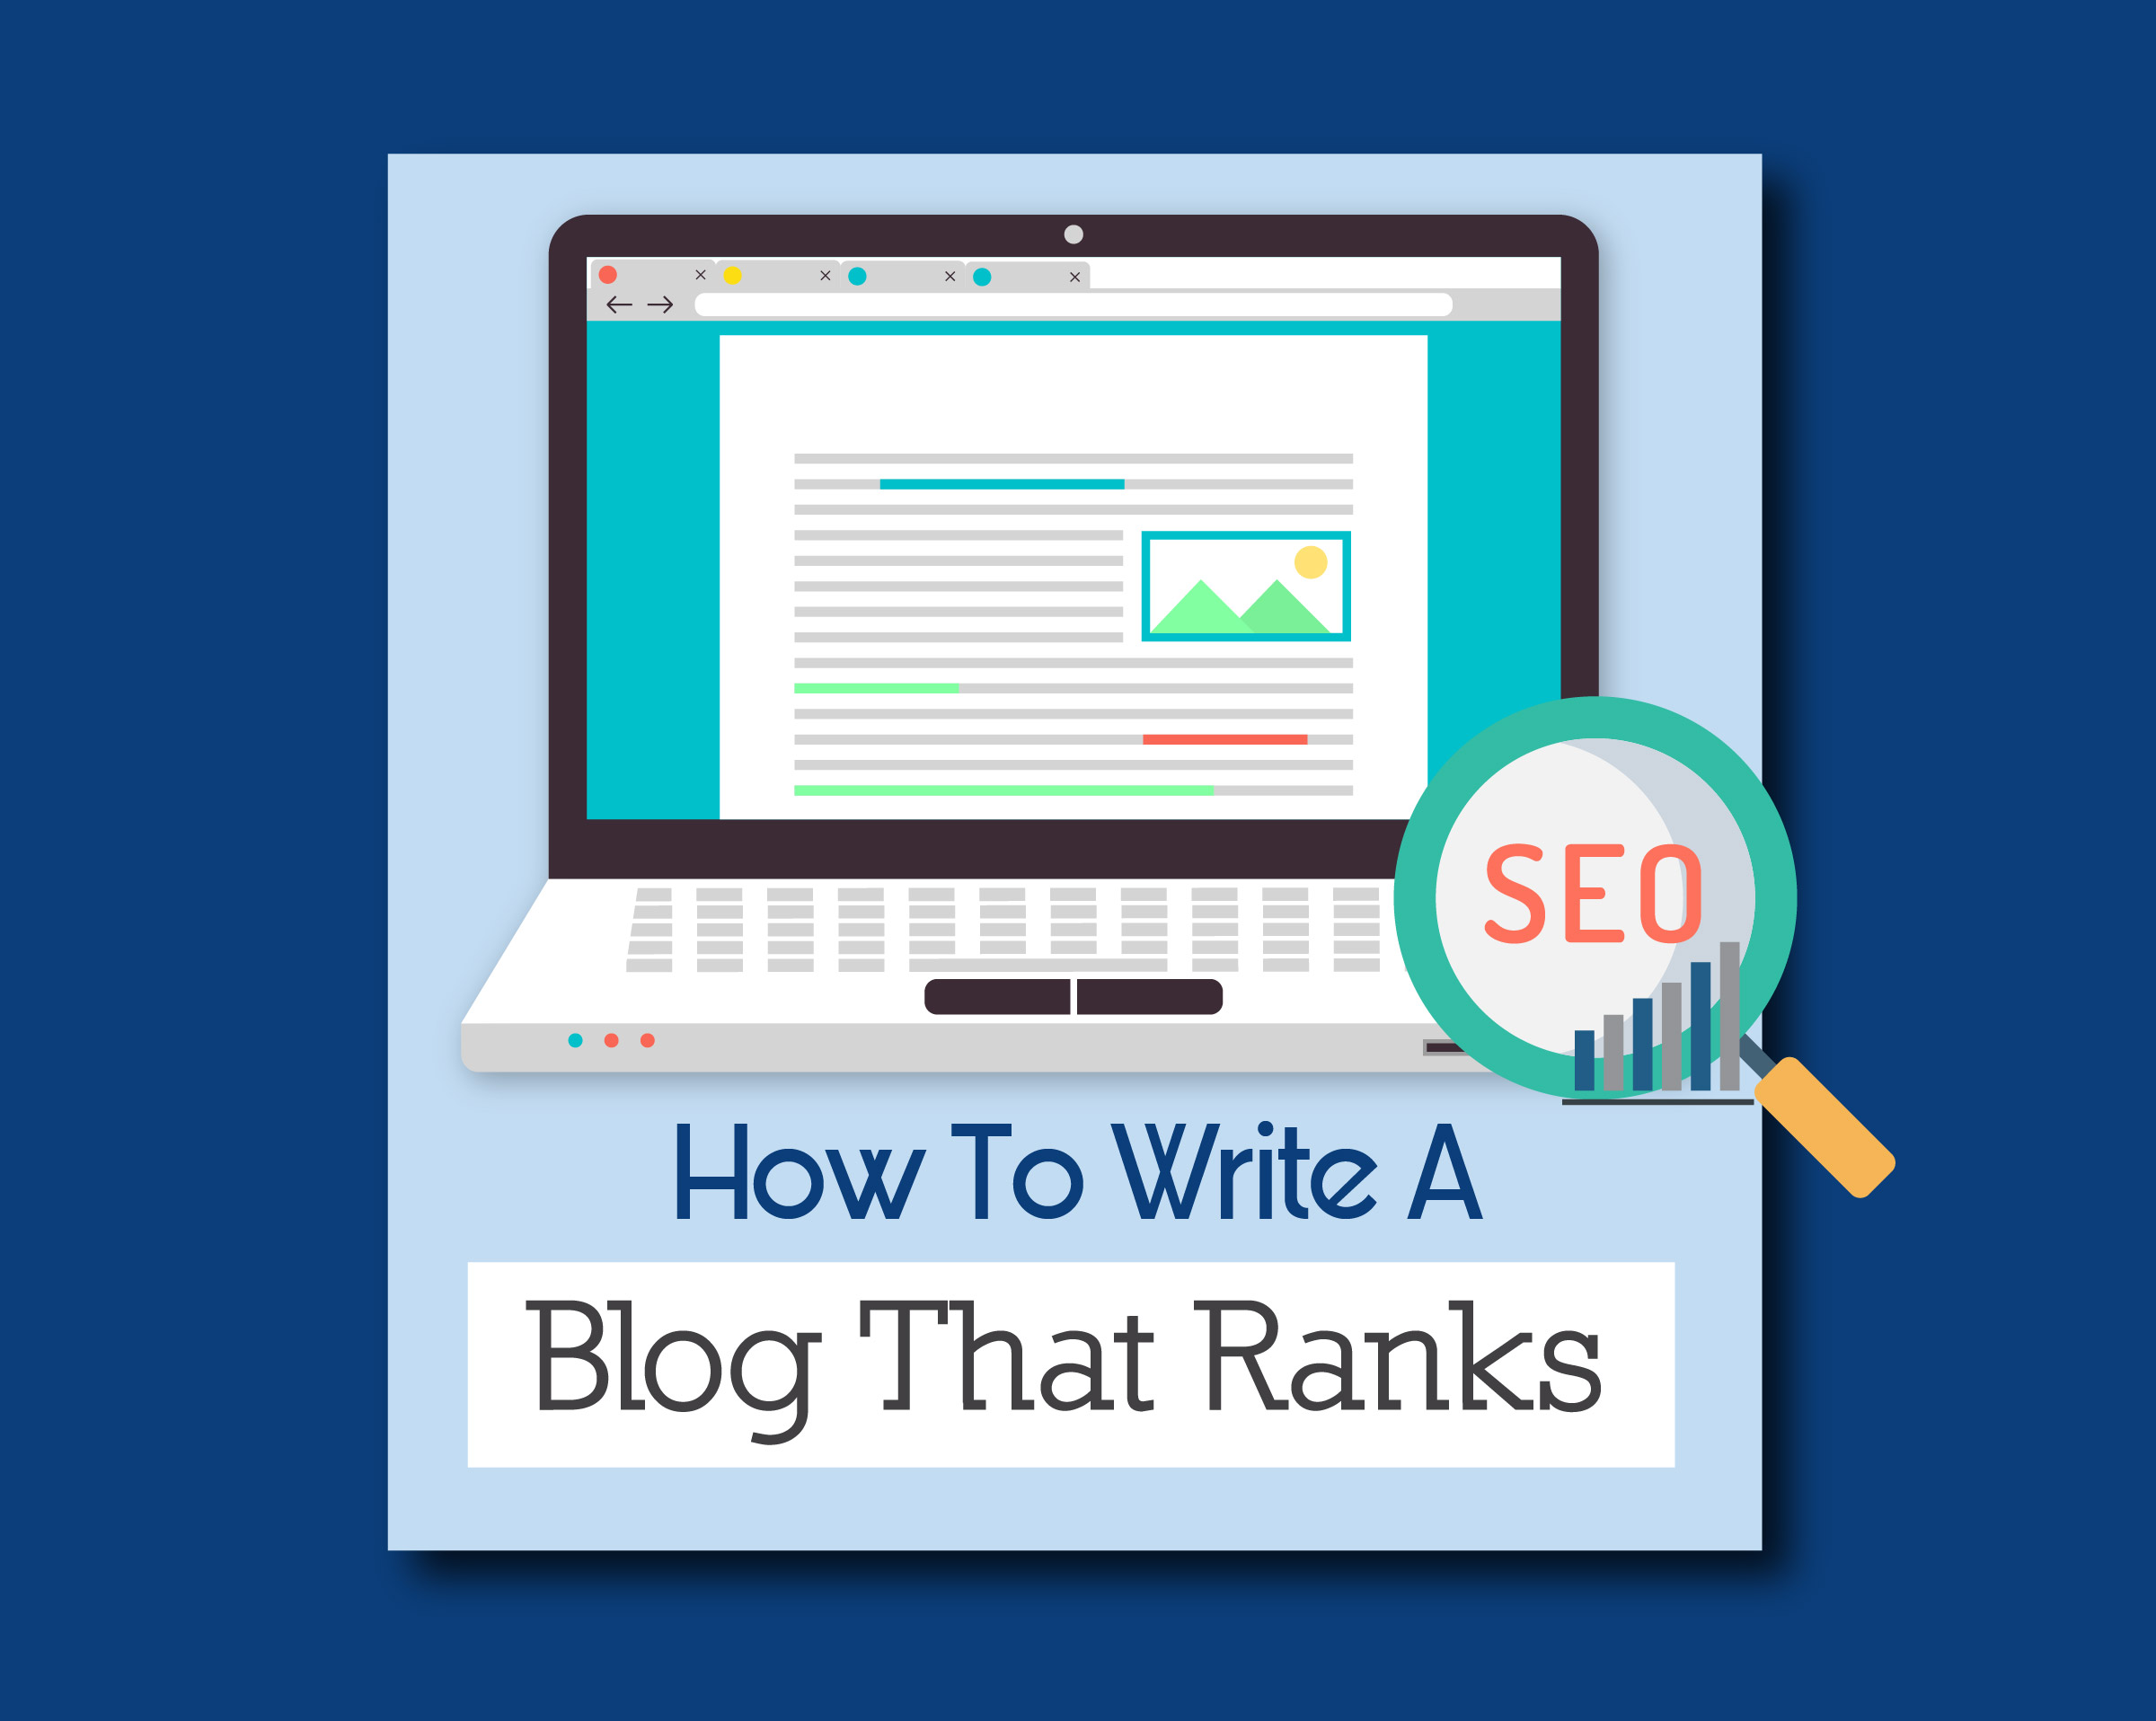 Tips on how to write a blog that ranks high on search engines